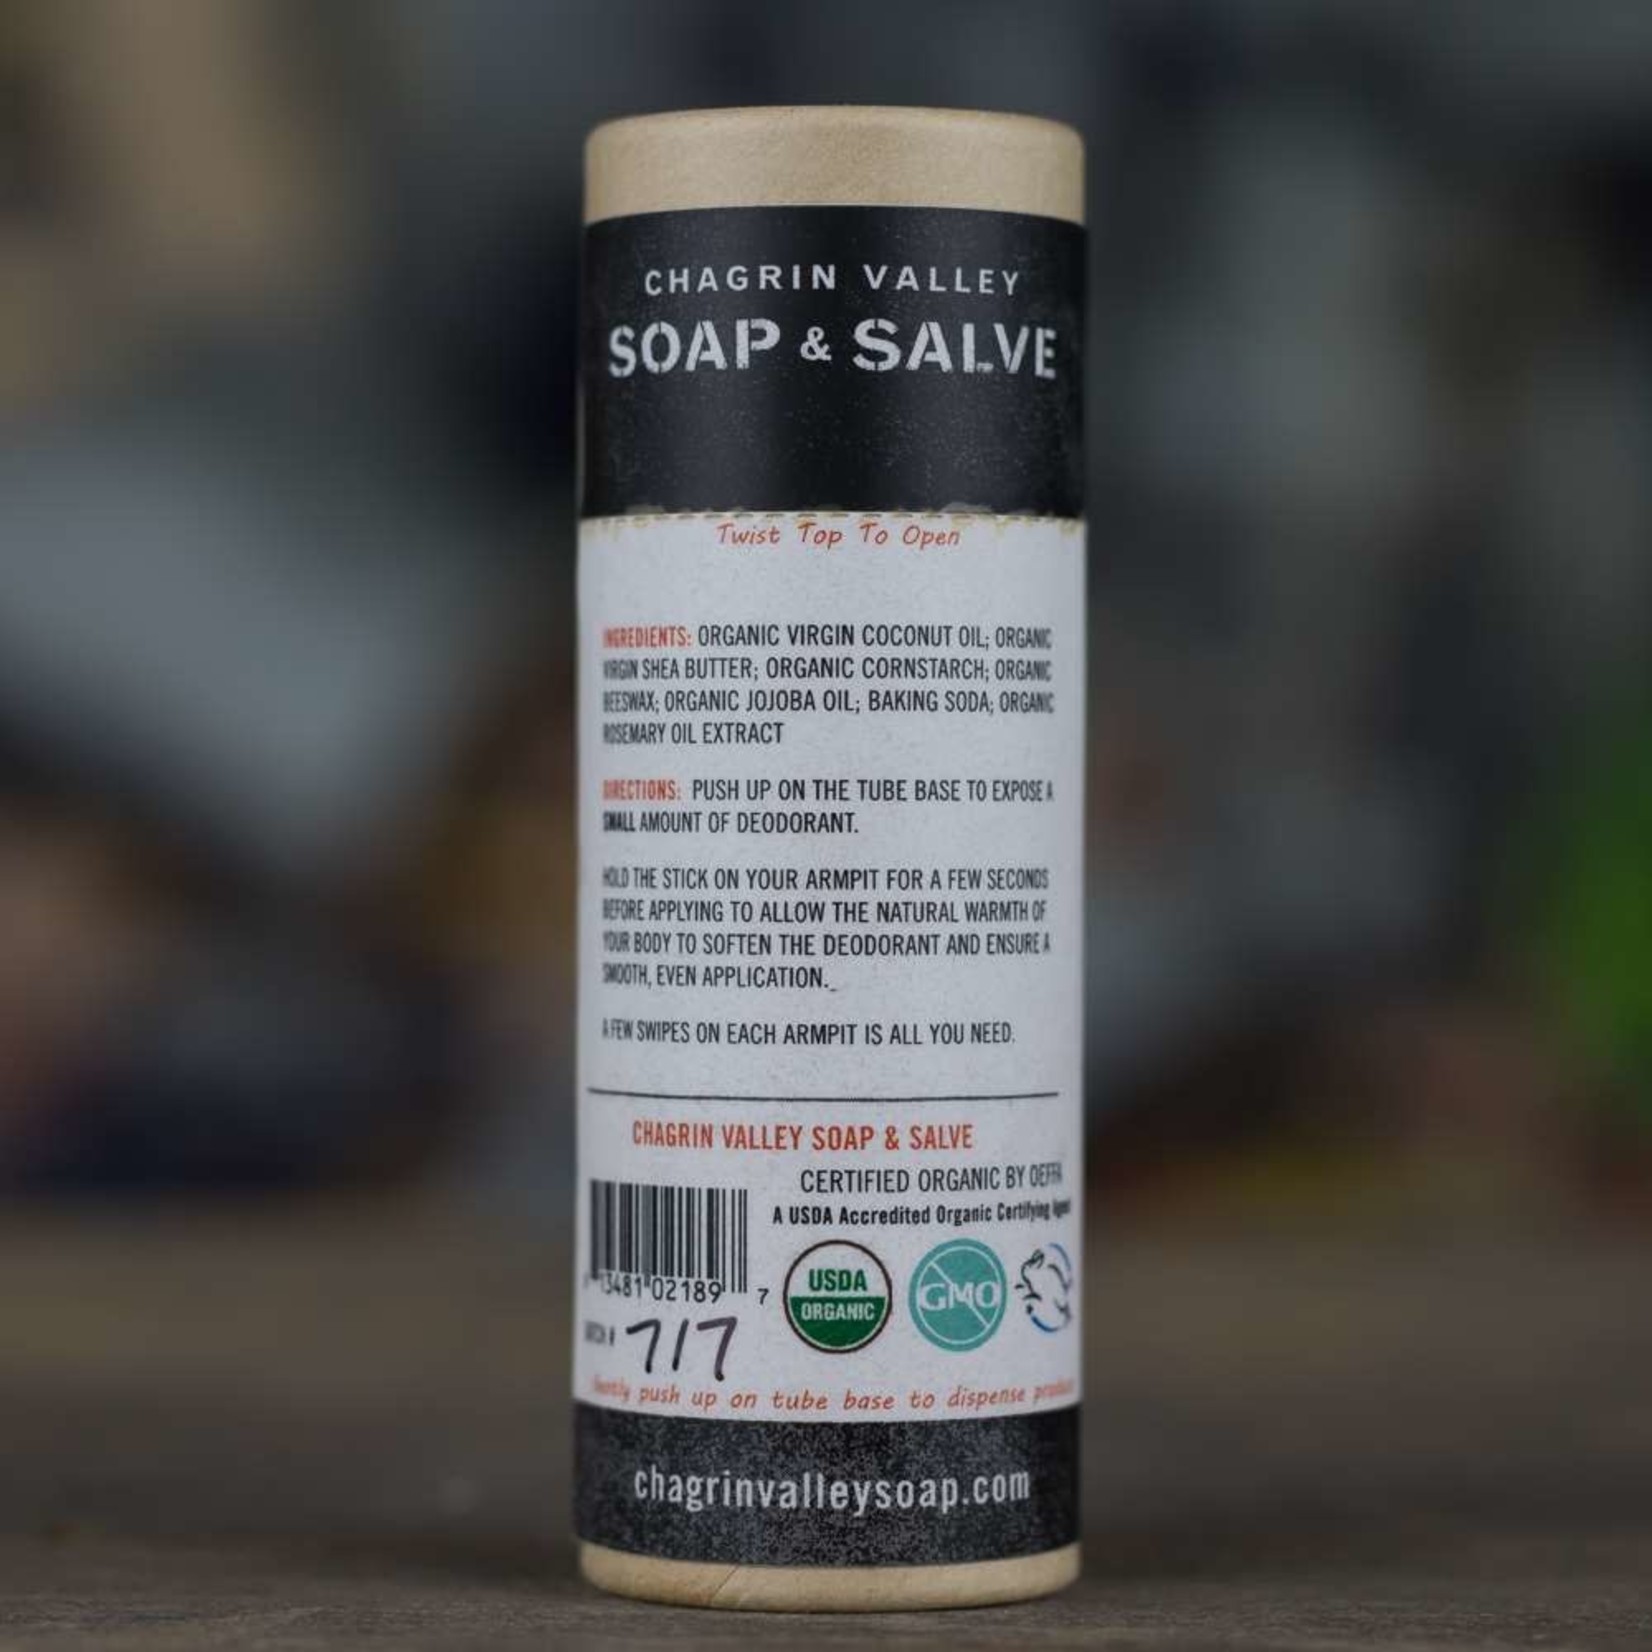 Chagrin Valley Soap and Salve Natural Scent 1.5oz Coconut Stick Deodorant